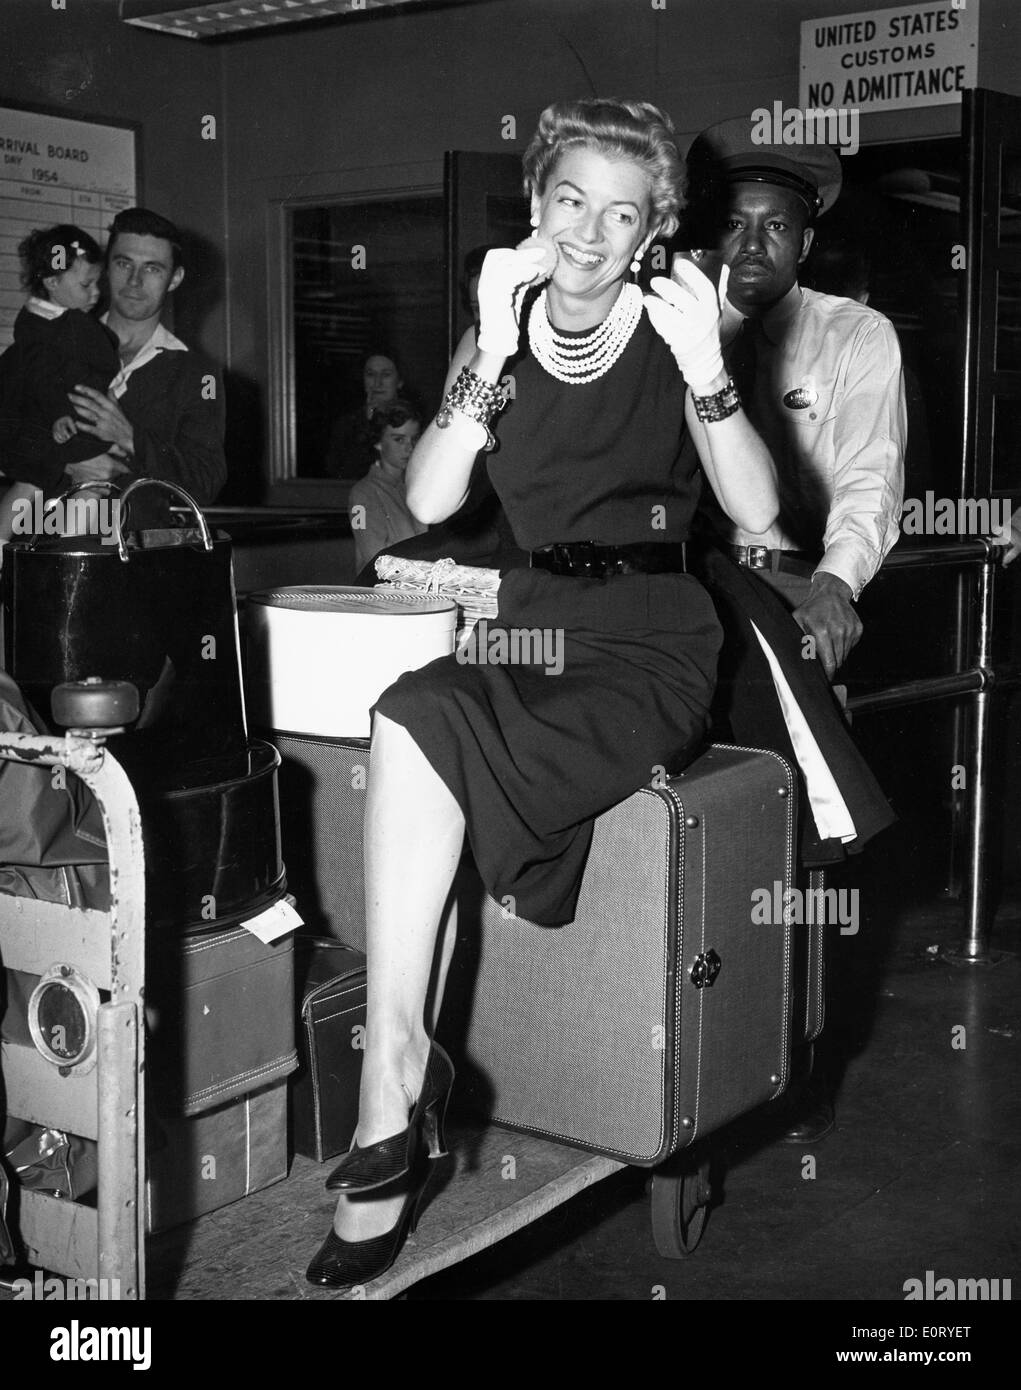 Actress Betty Furness at the airport Stock Photo